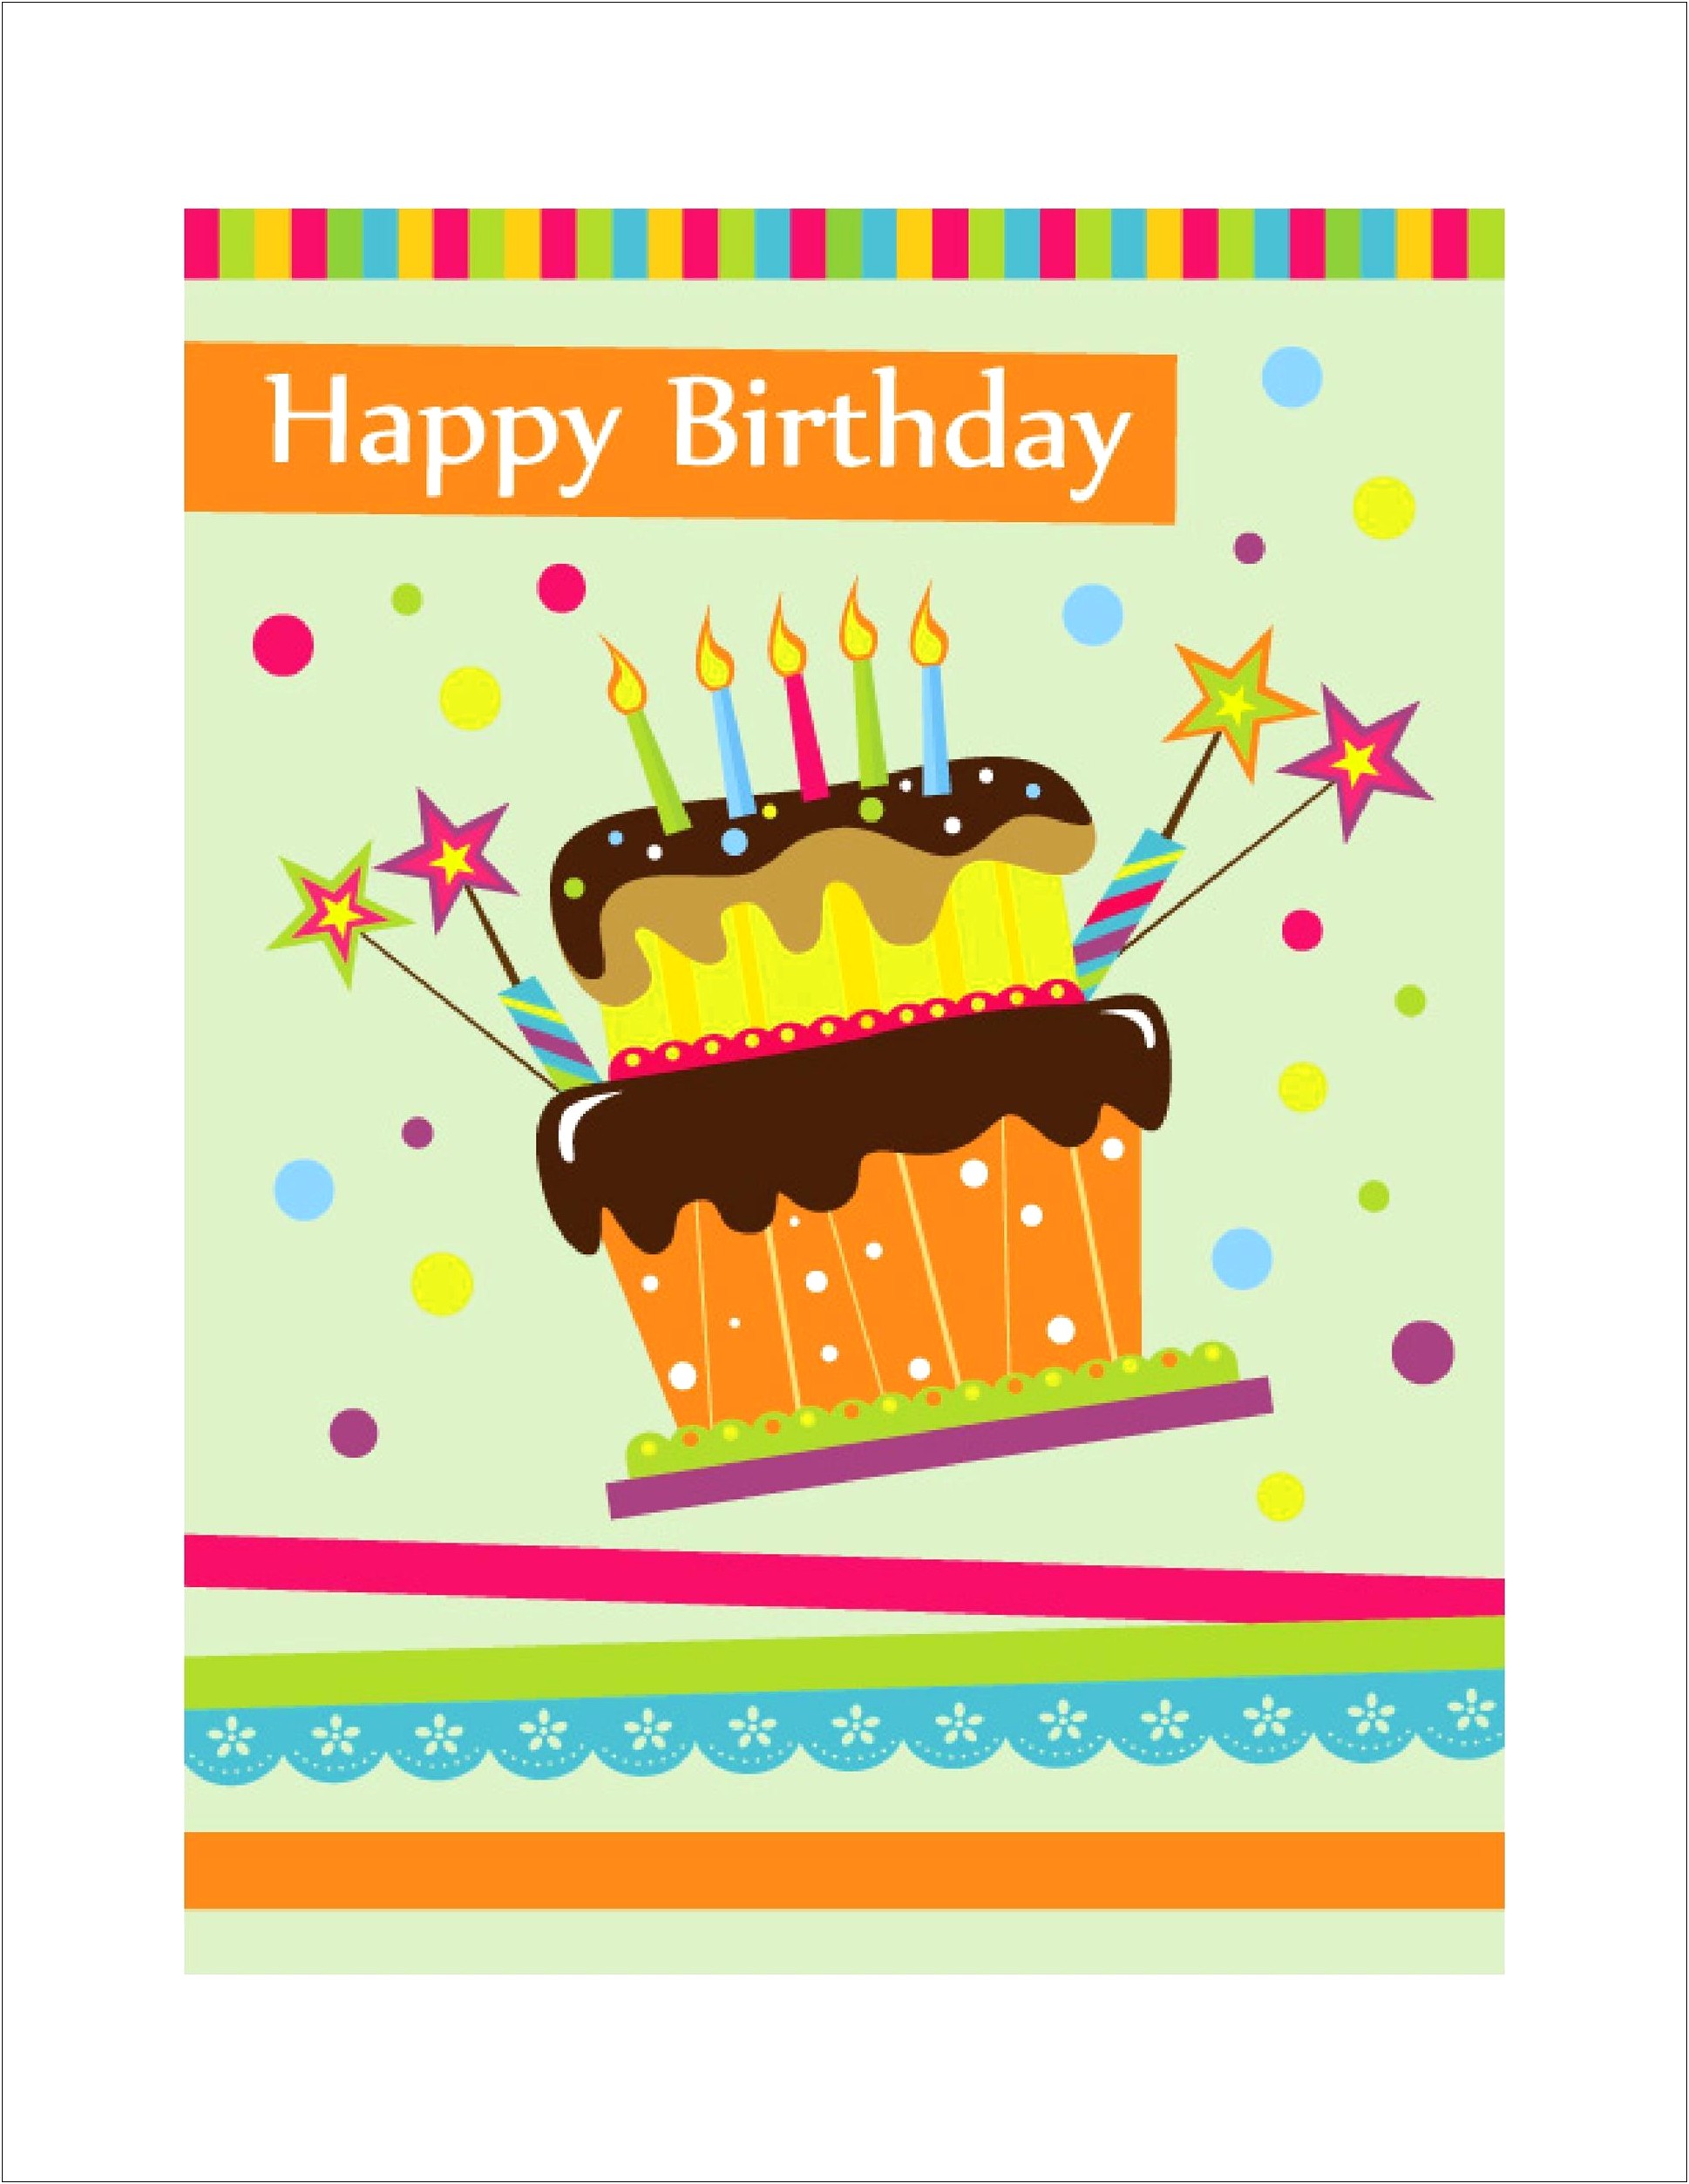 happy-birthday-card-template-free-download-templates-resume-designs-z5gaqbdgzd